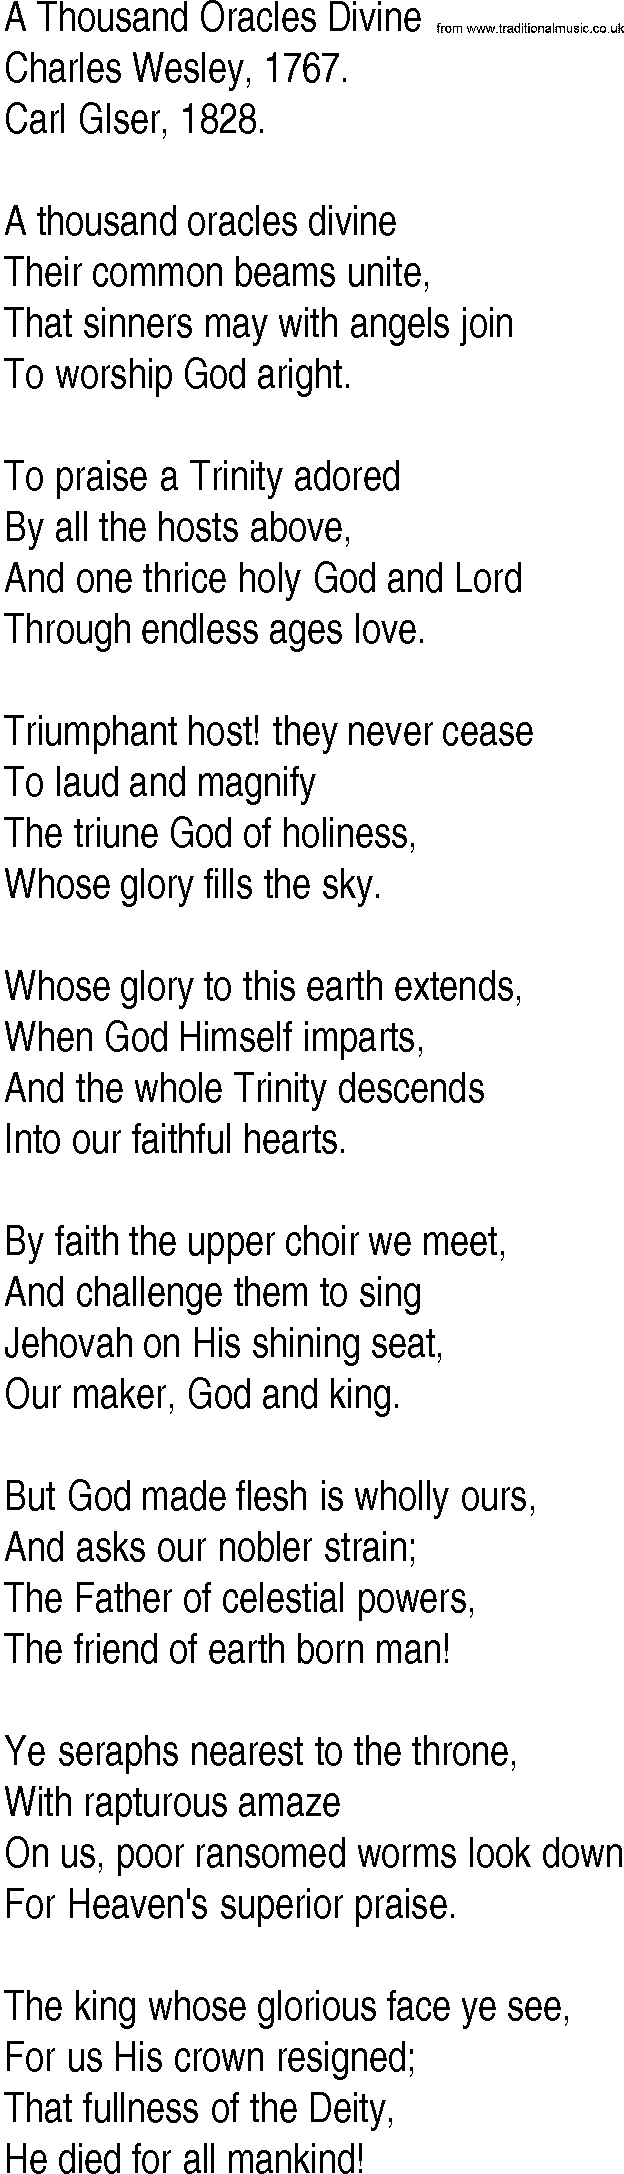 Hymn and Gospel Song: A Thousand Oracles Divine by Charles Wesley lyrics